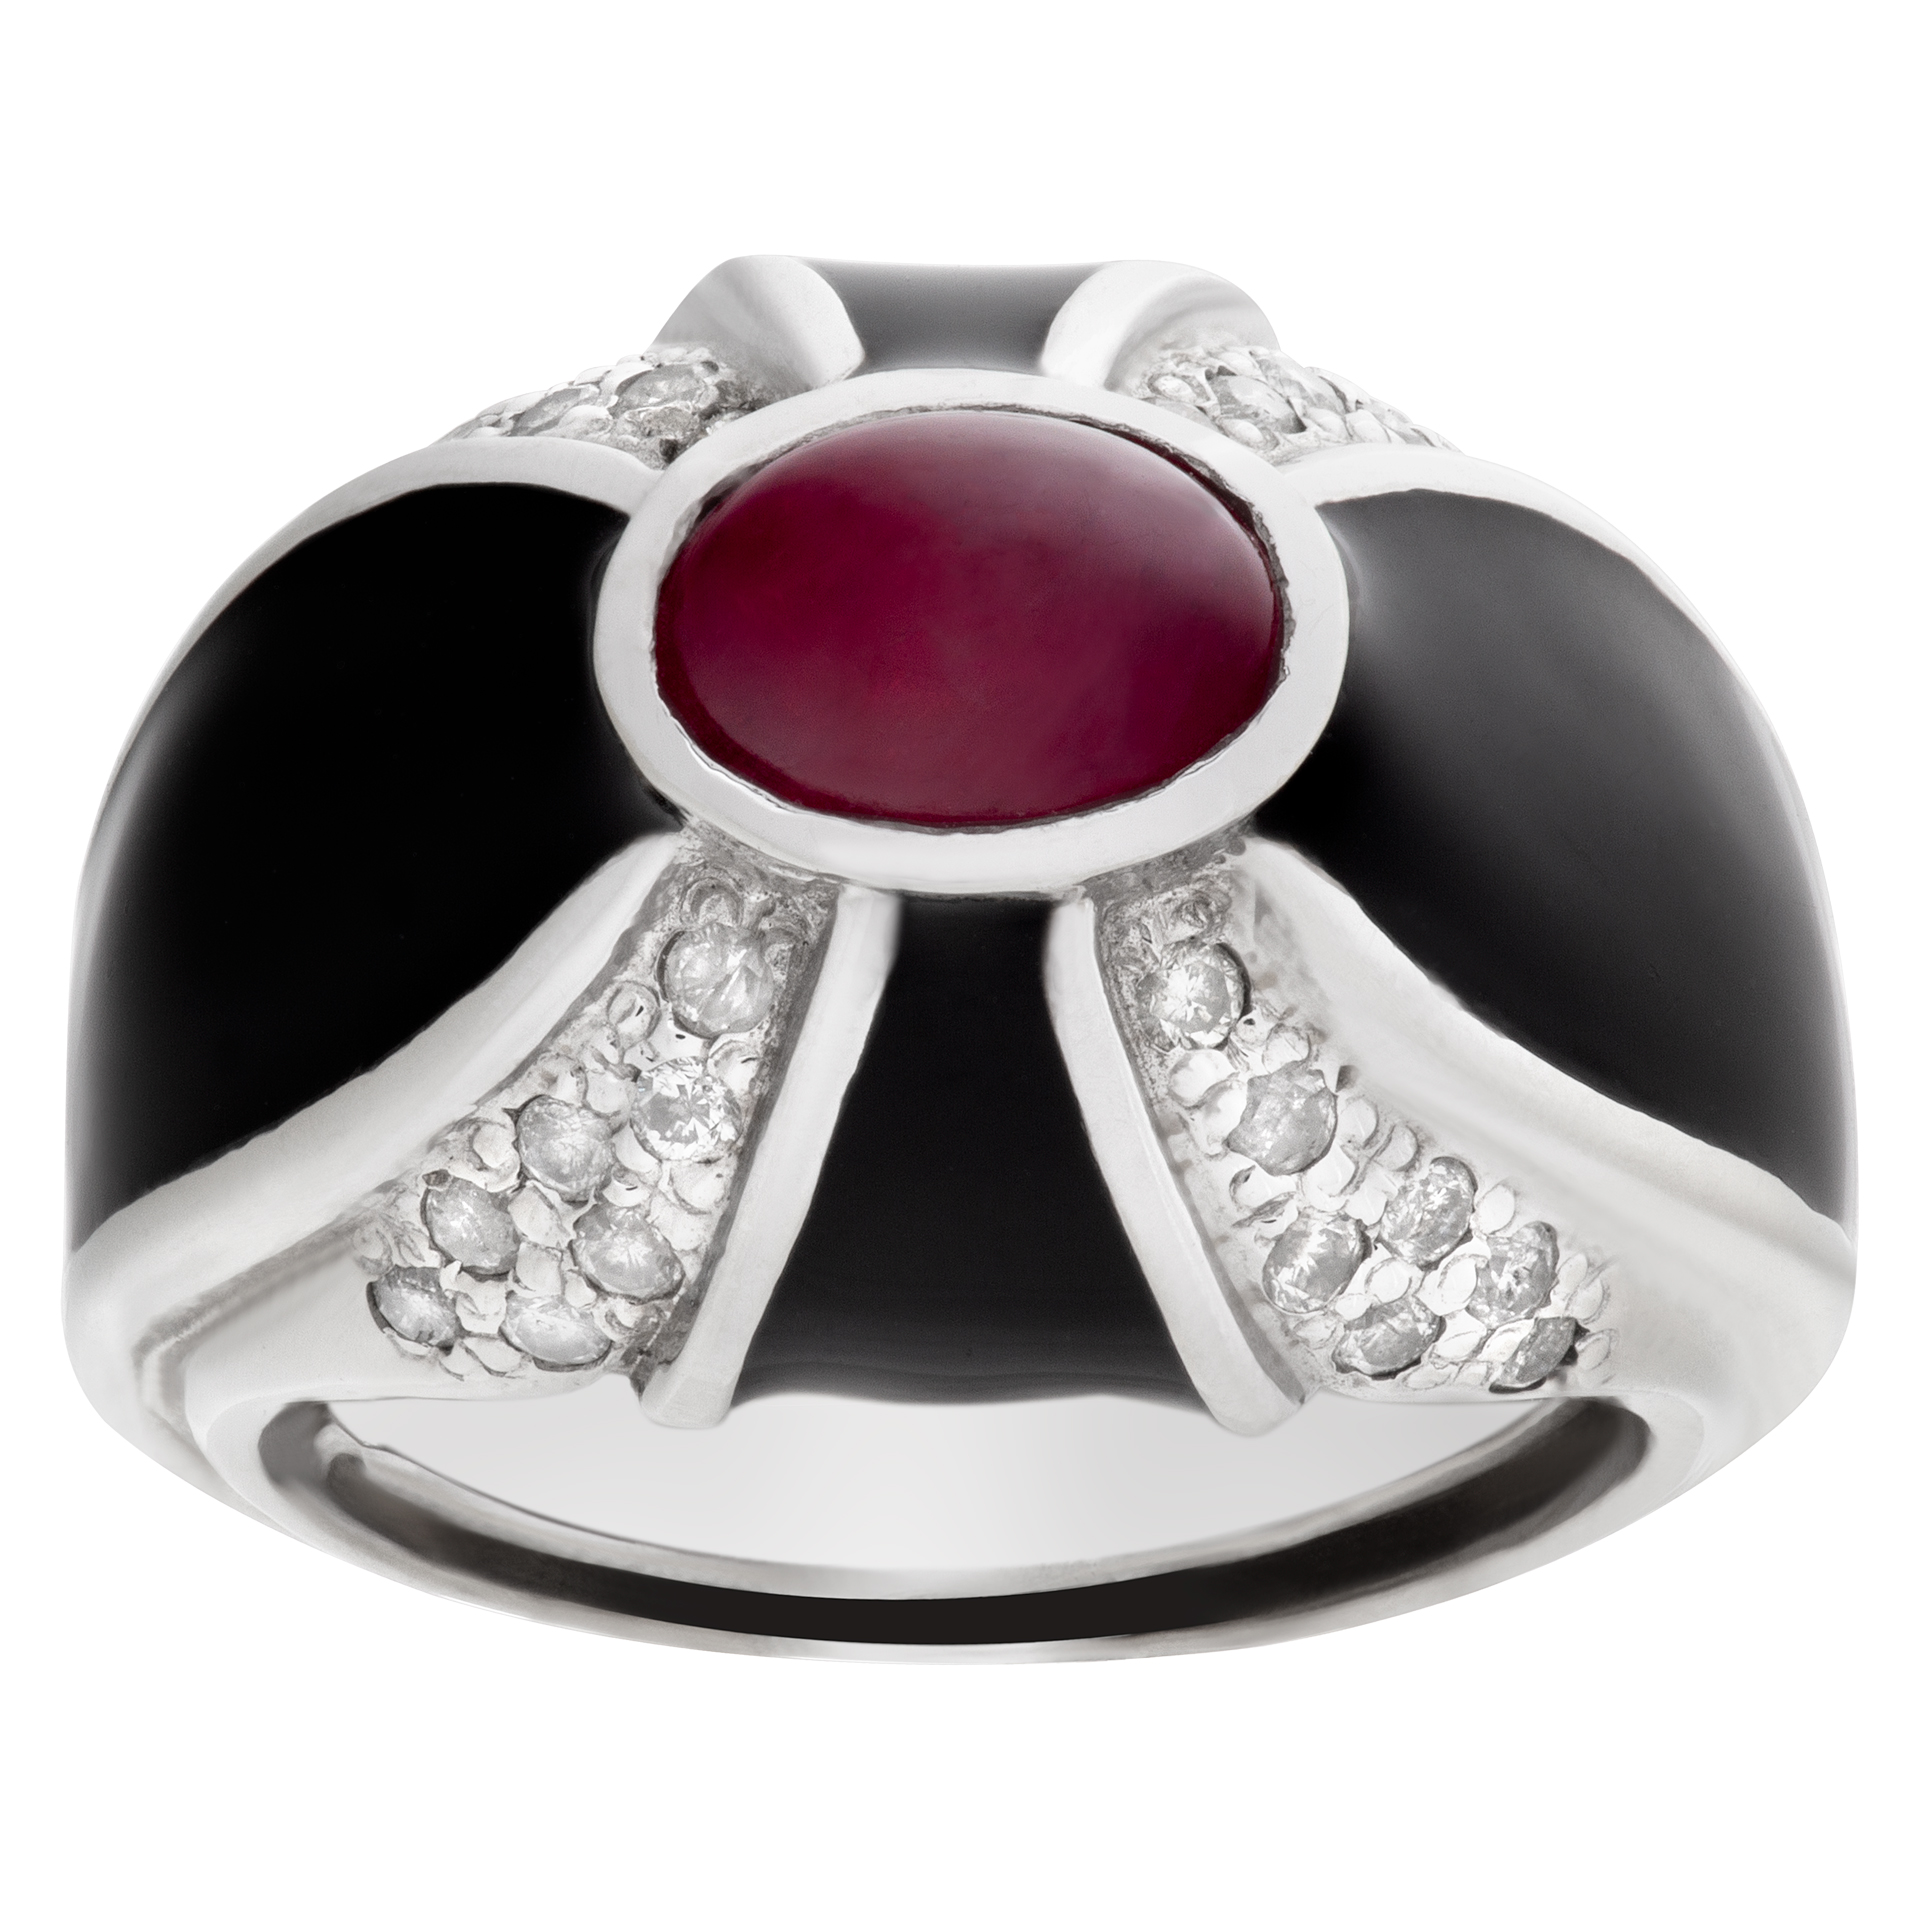 Stunning cabochon ruby and diamond ring in 14k white gold with black enamel image 1